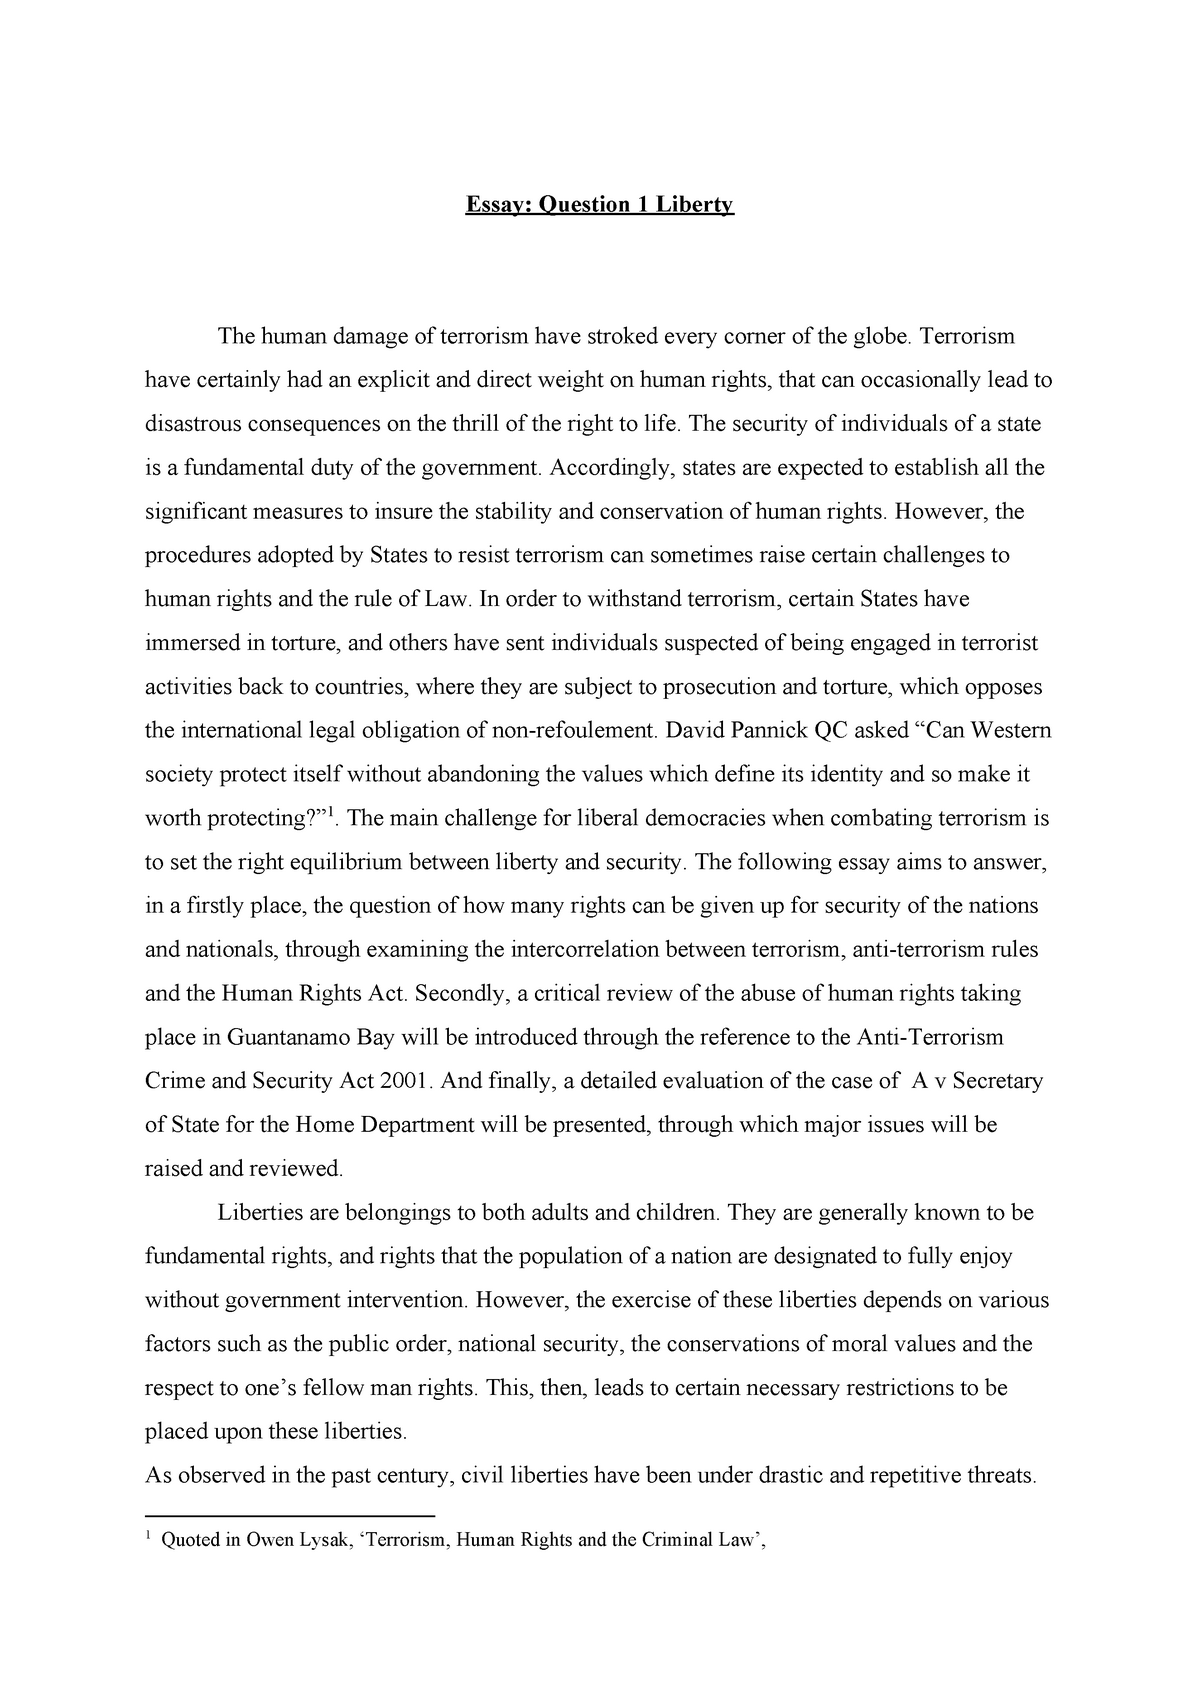 human rights and terrorism essay